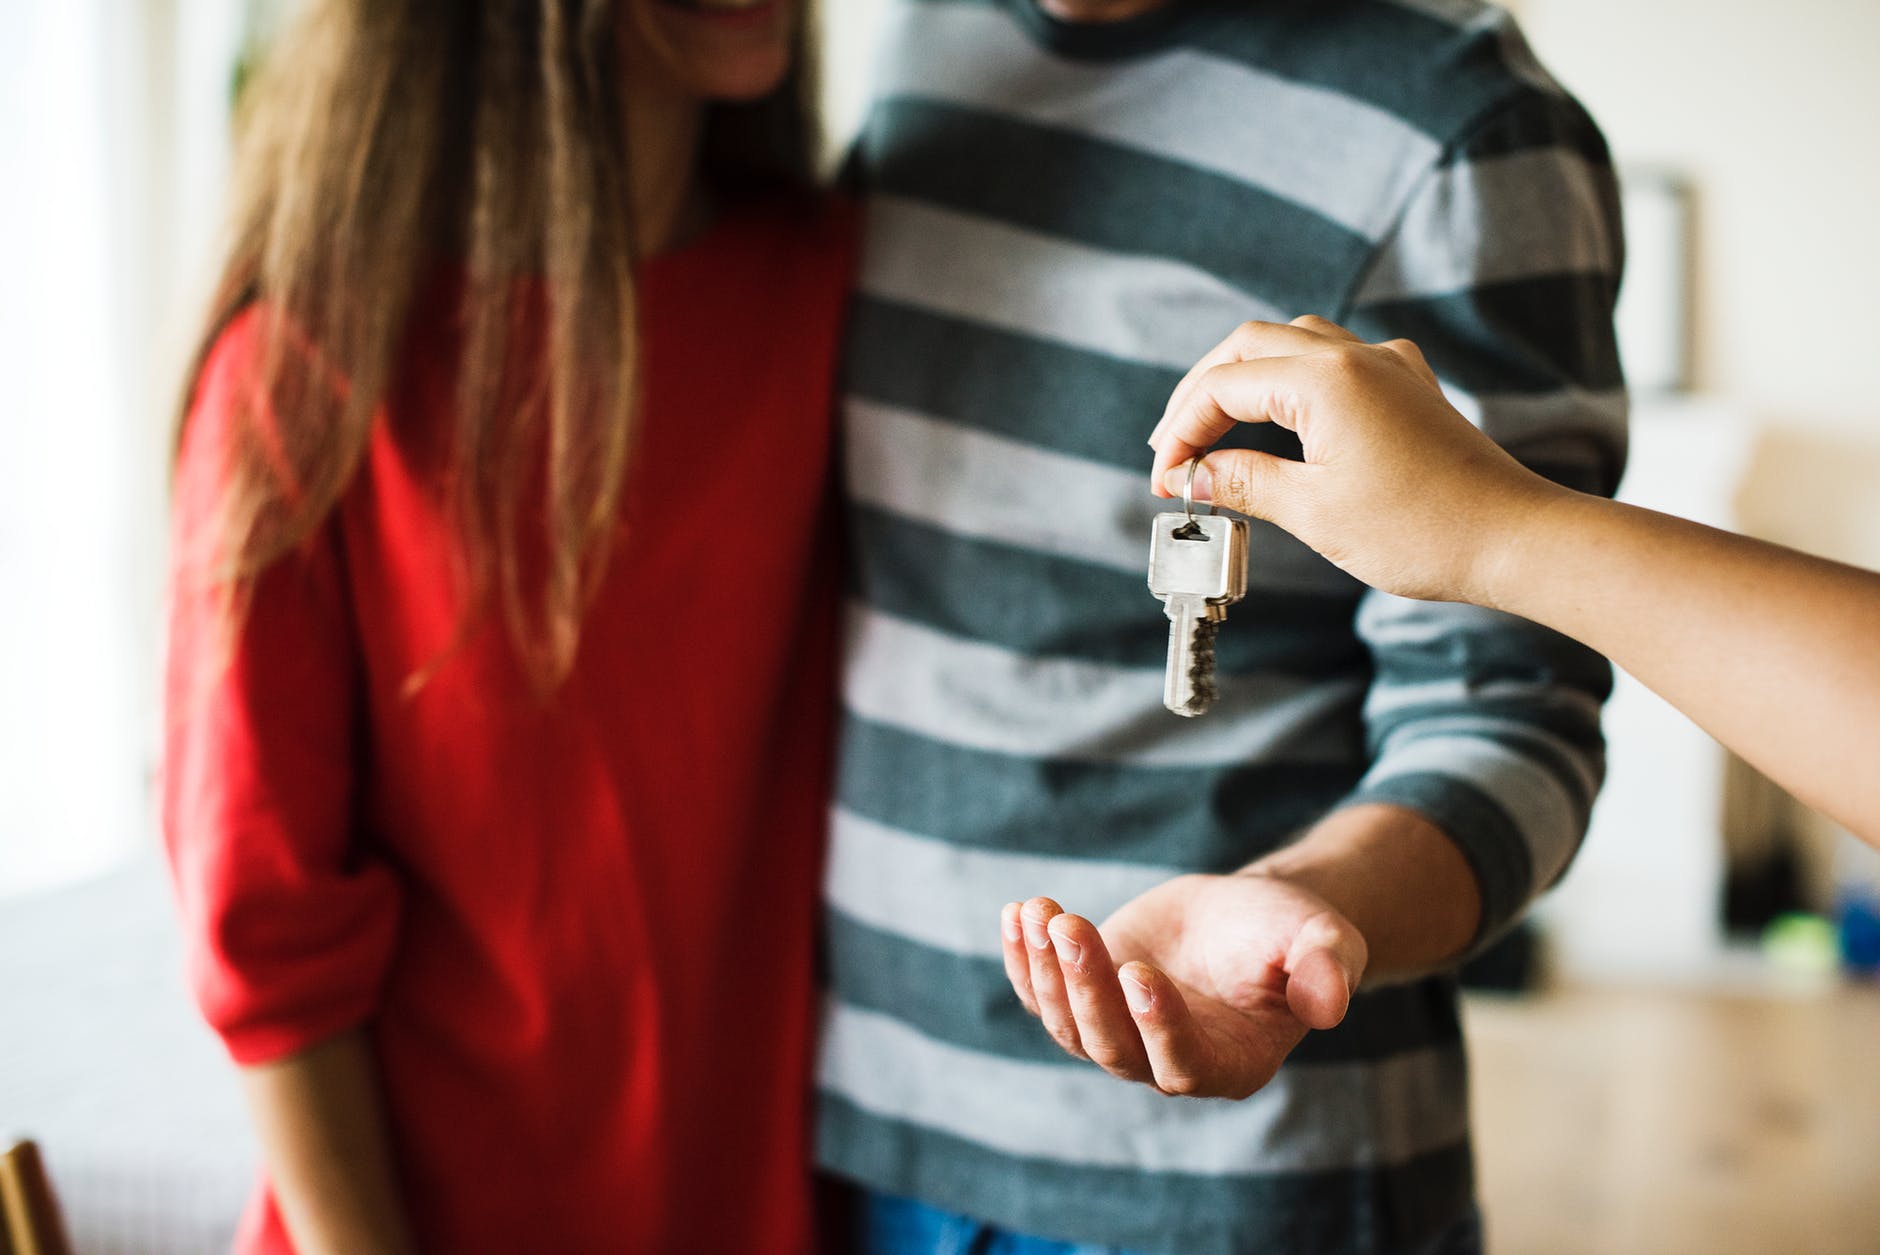 People receiving keys to their property asset